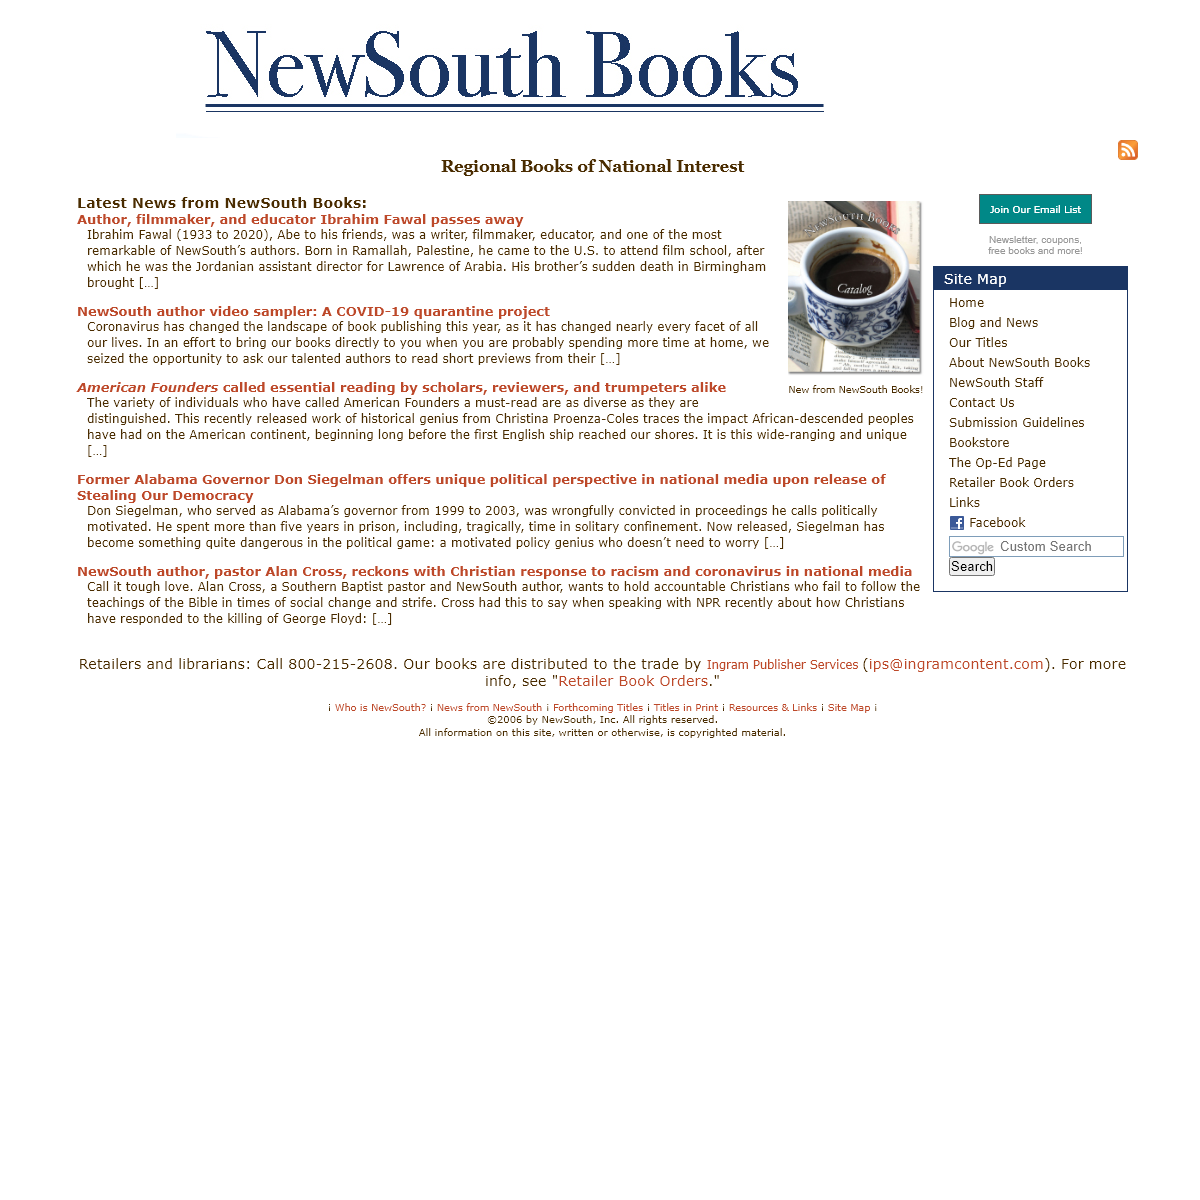 A complete backup of newsouthbooks.com